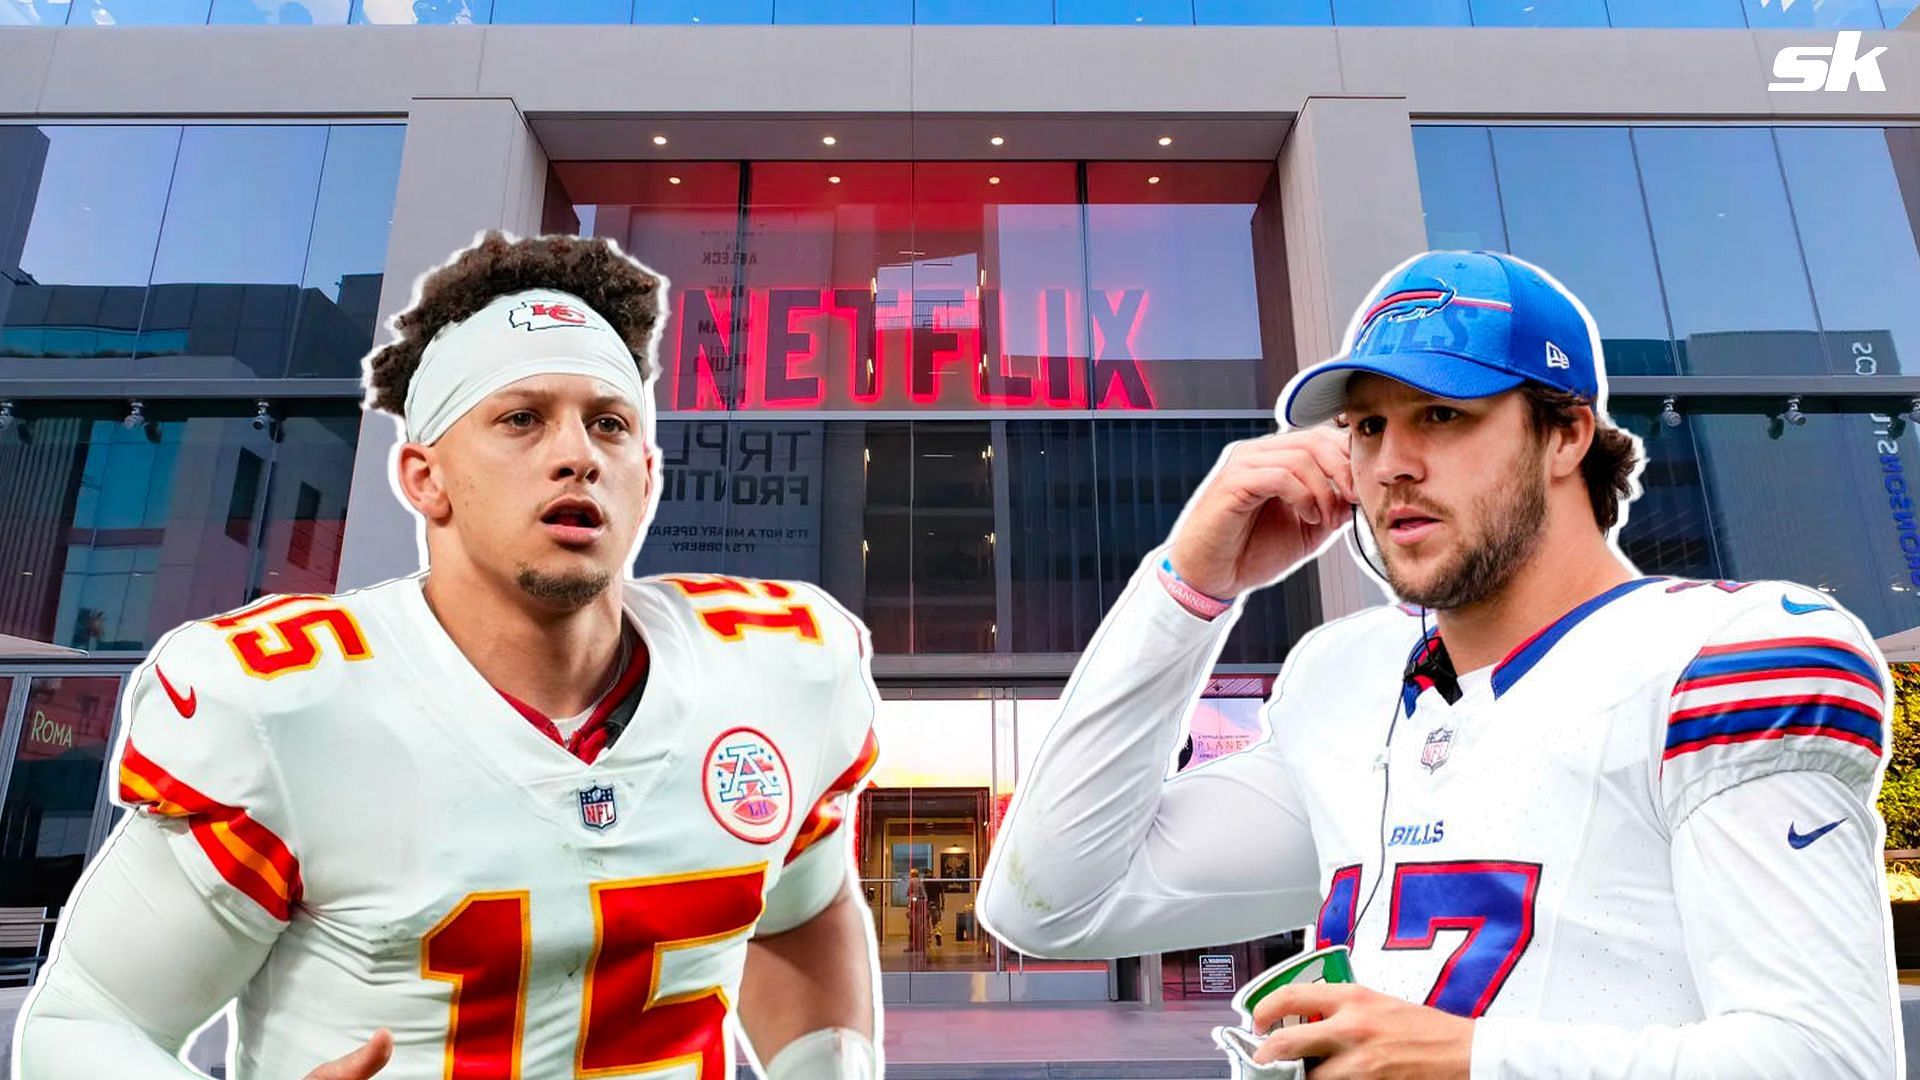 Josh Allen consults Patrick Mahomes about potential appearance on Netflix